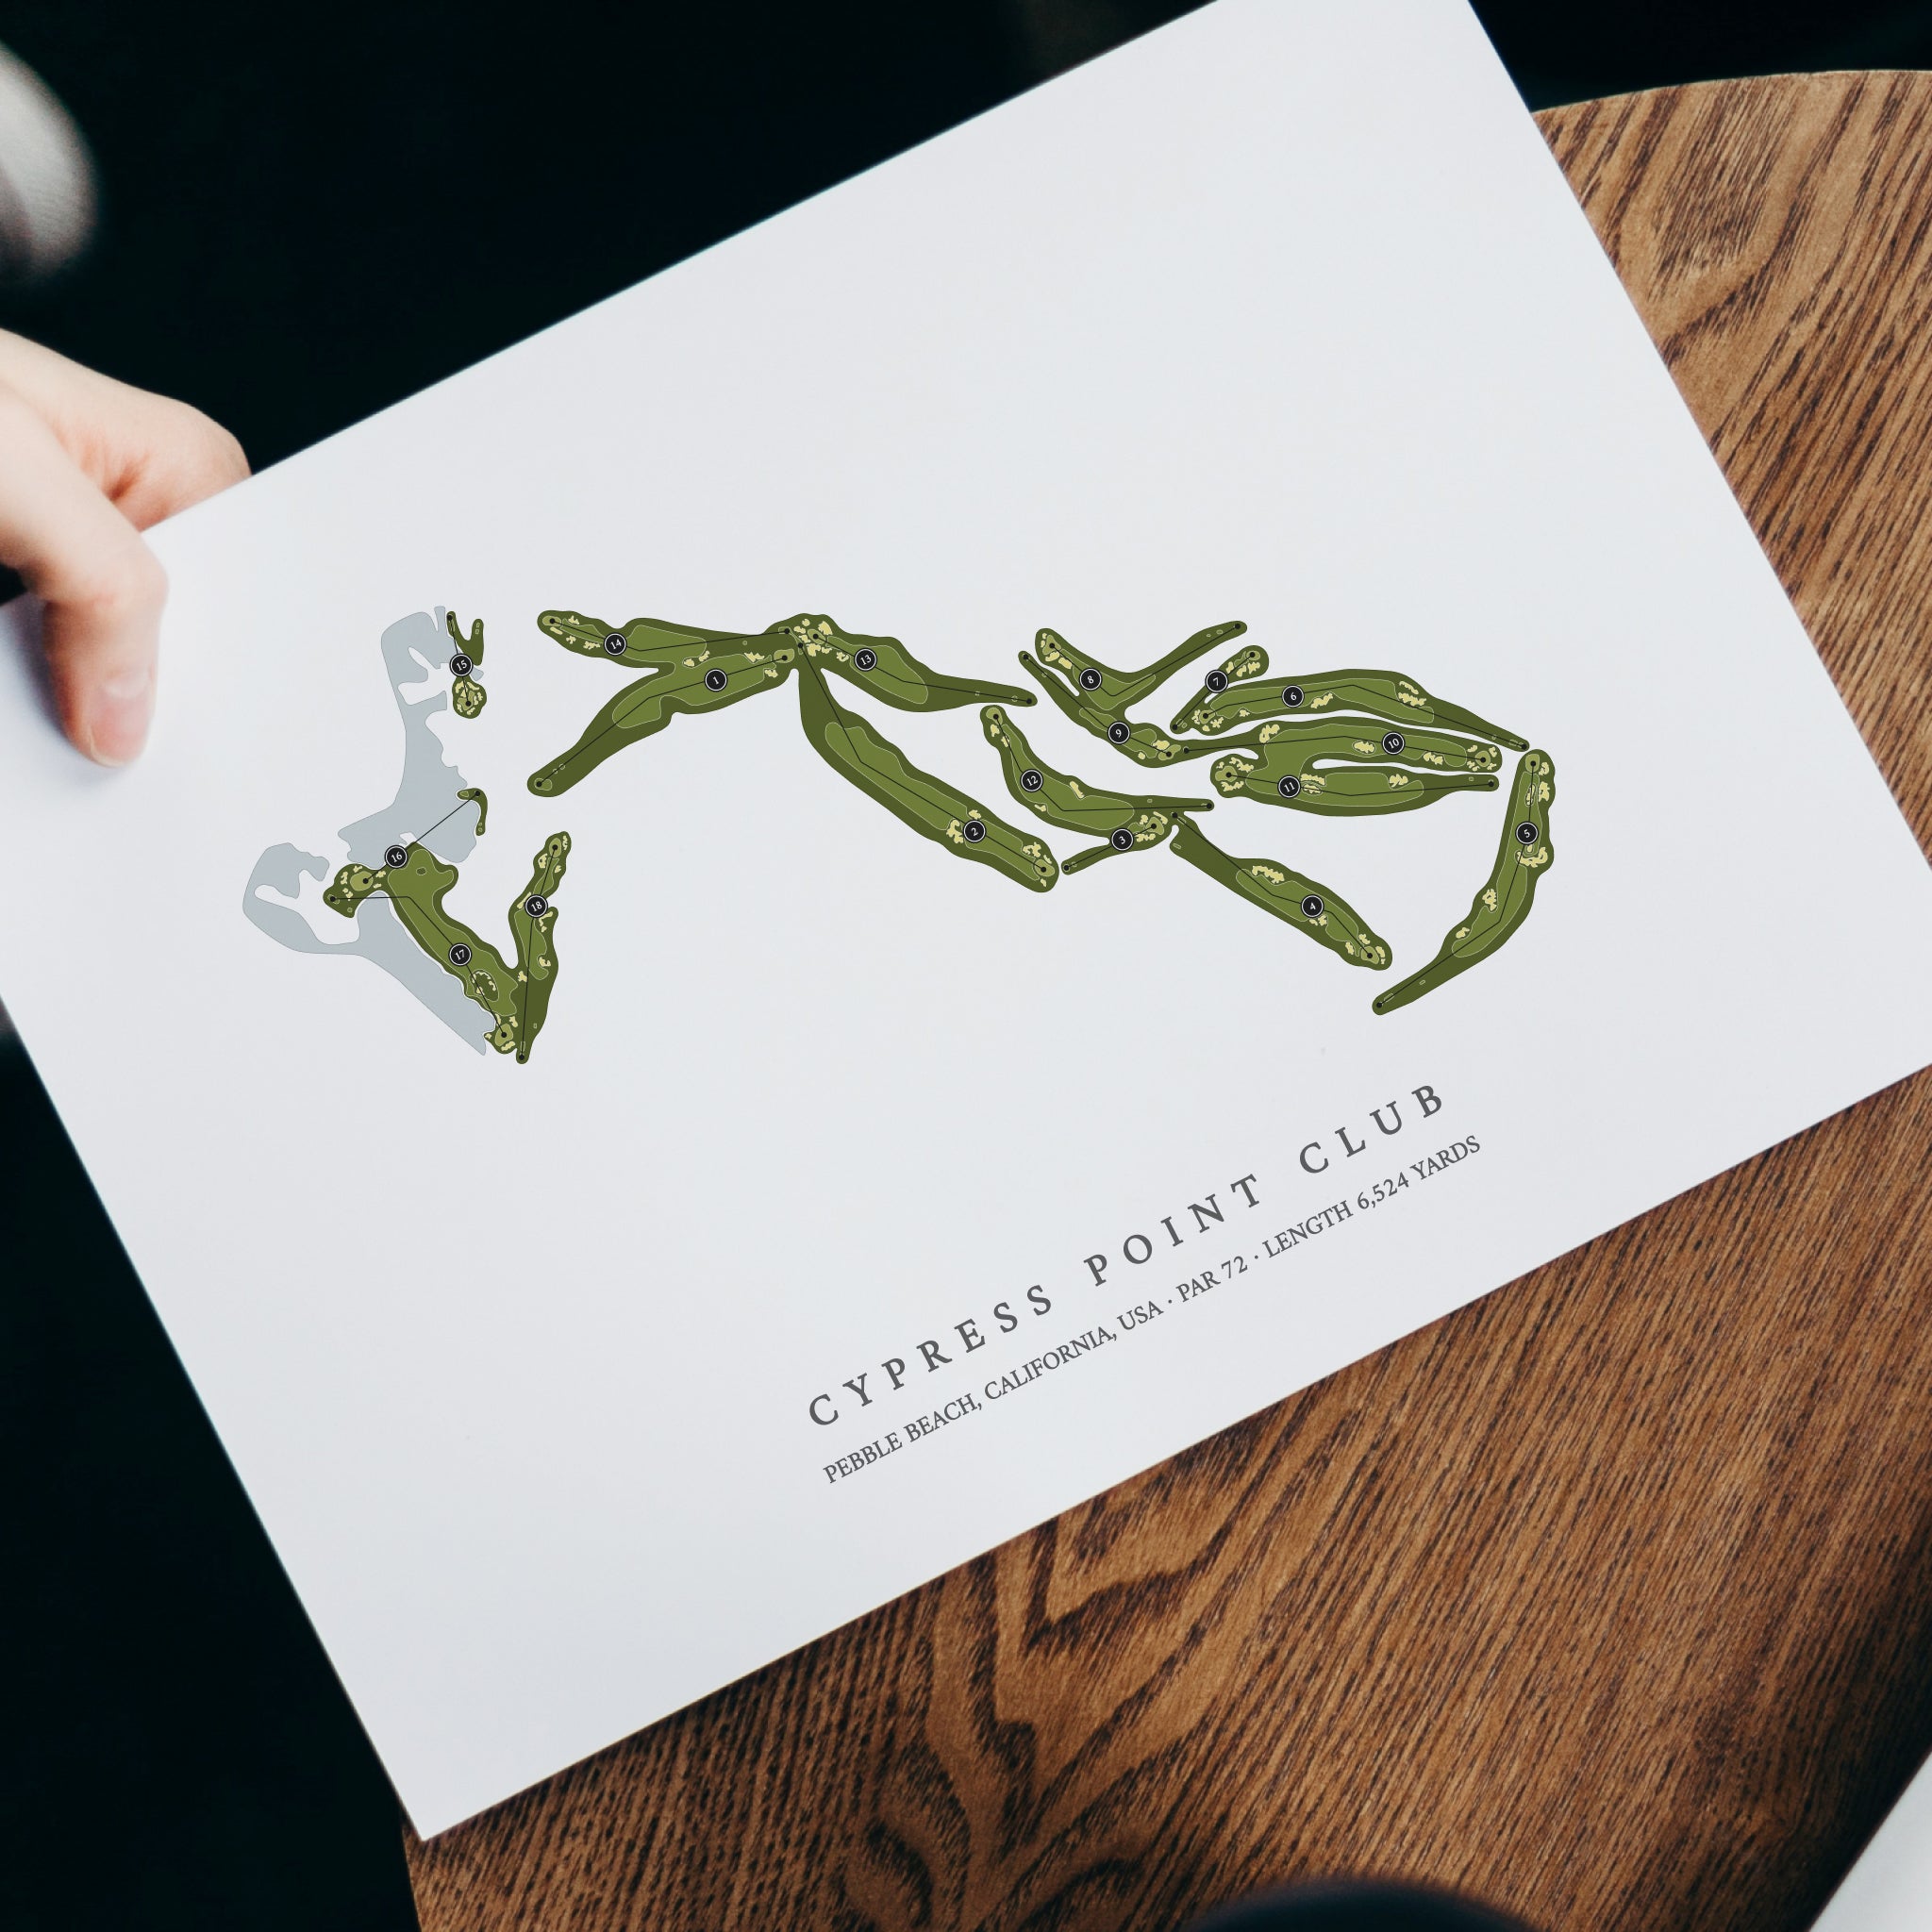 Cypress Point Club| Golf Course Print | With Laptop 